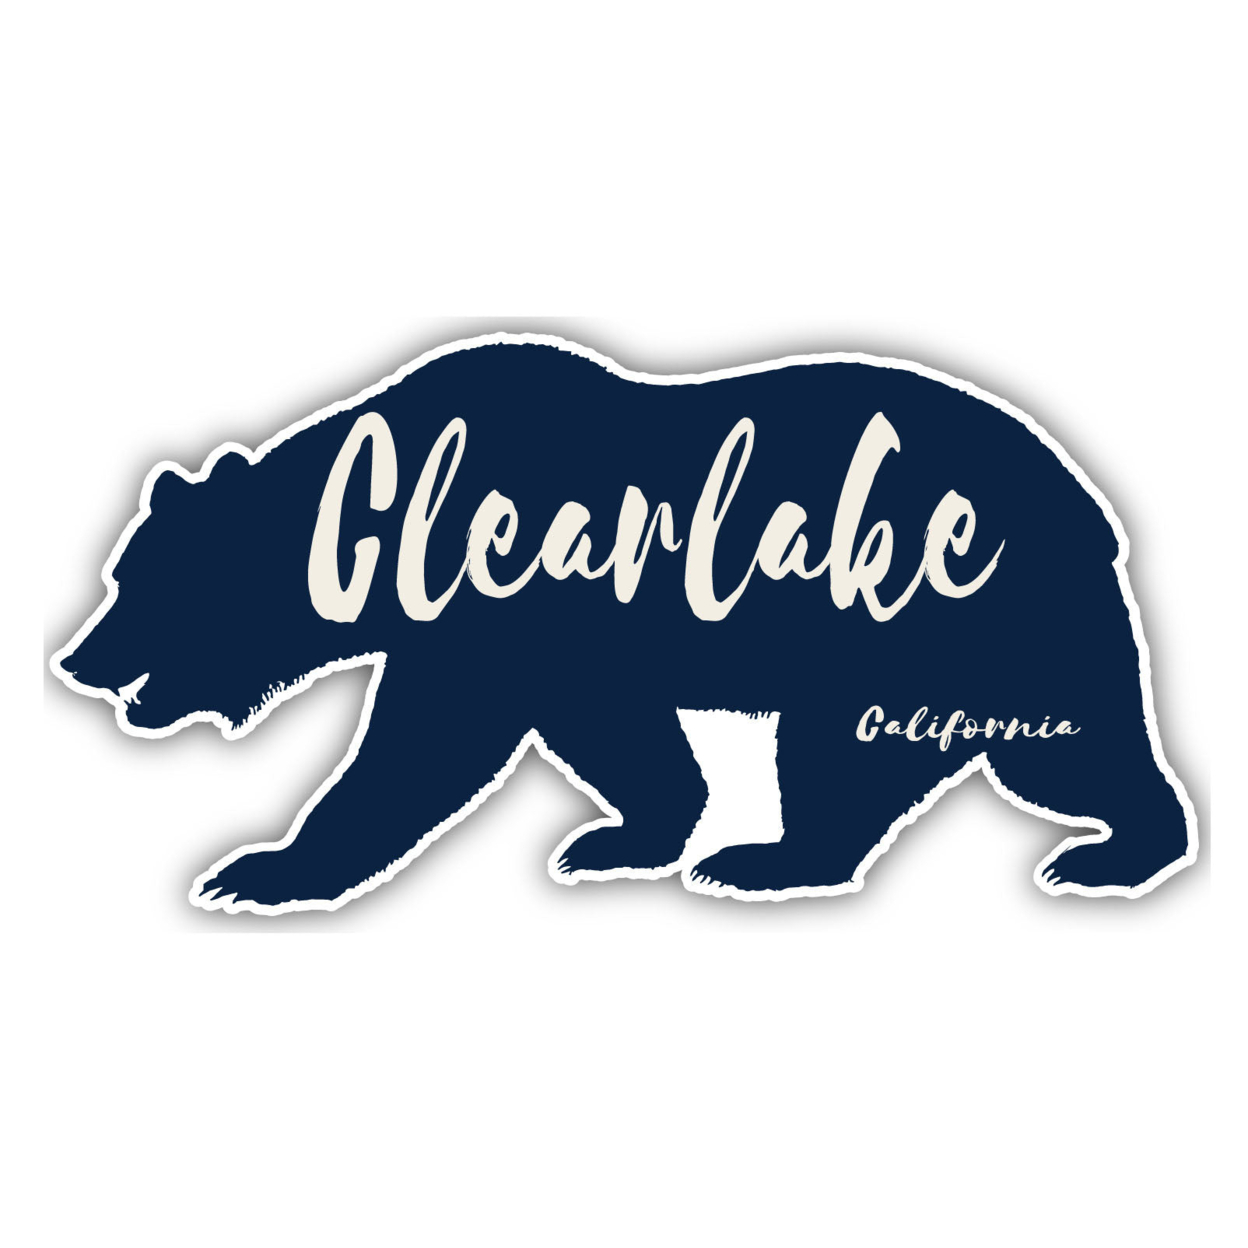 Clearlake California Souvenir Decorative Stickers (Choose Theme And Size) - 4-Pack, 2-Inch, Bear